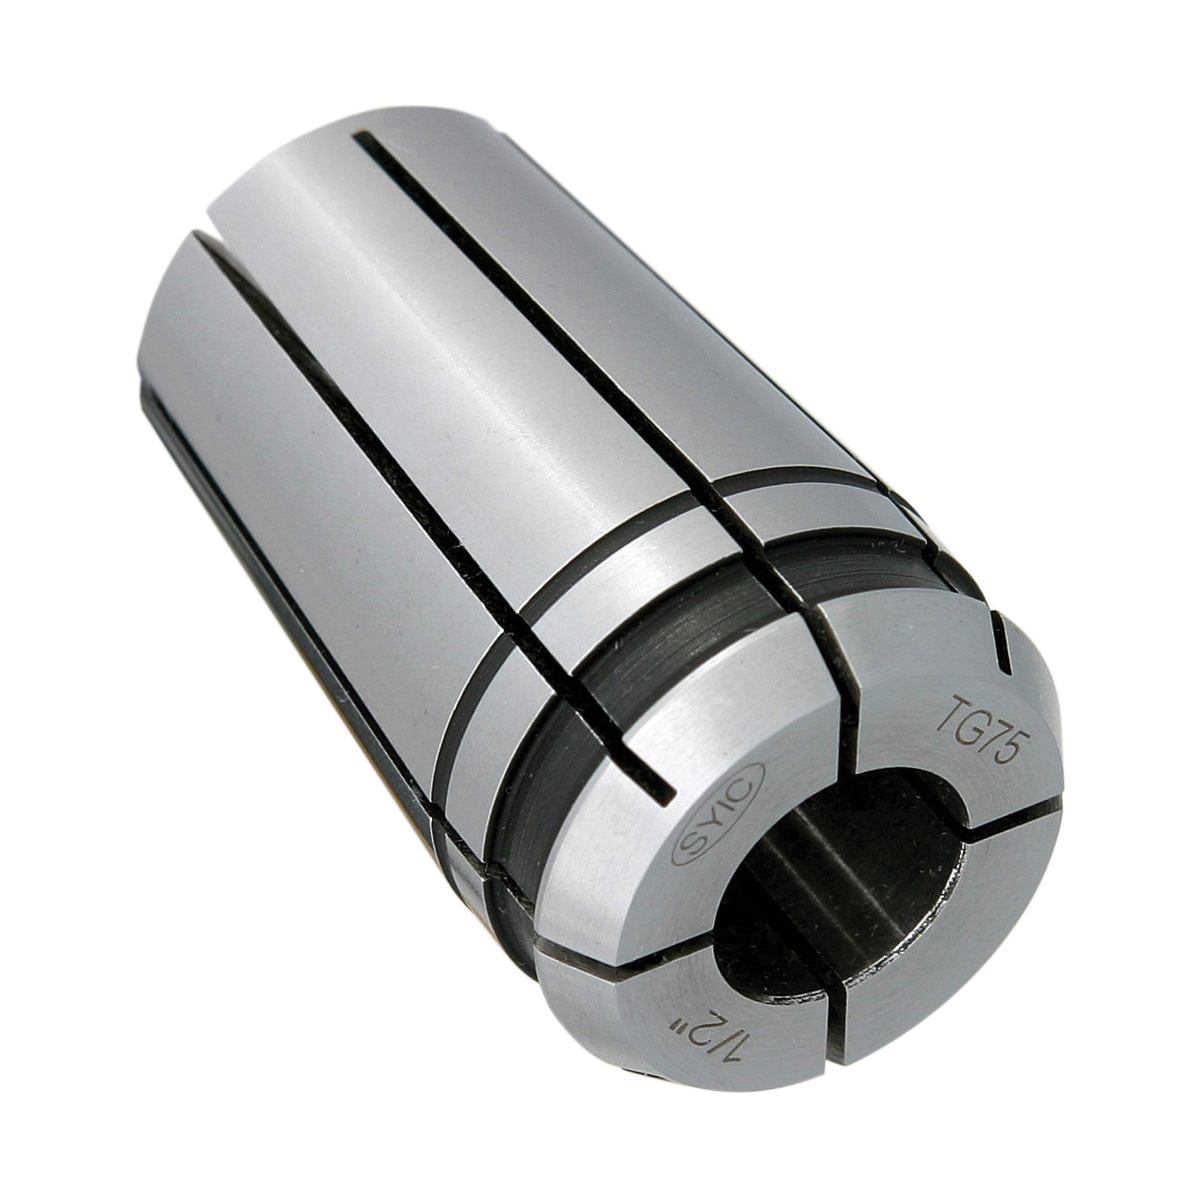 TG75 11/32" COLLET